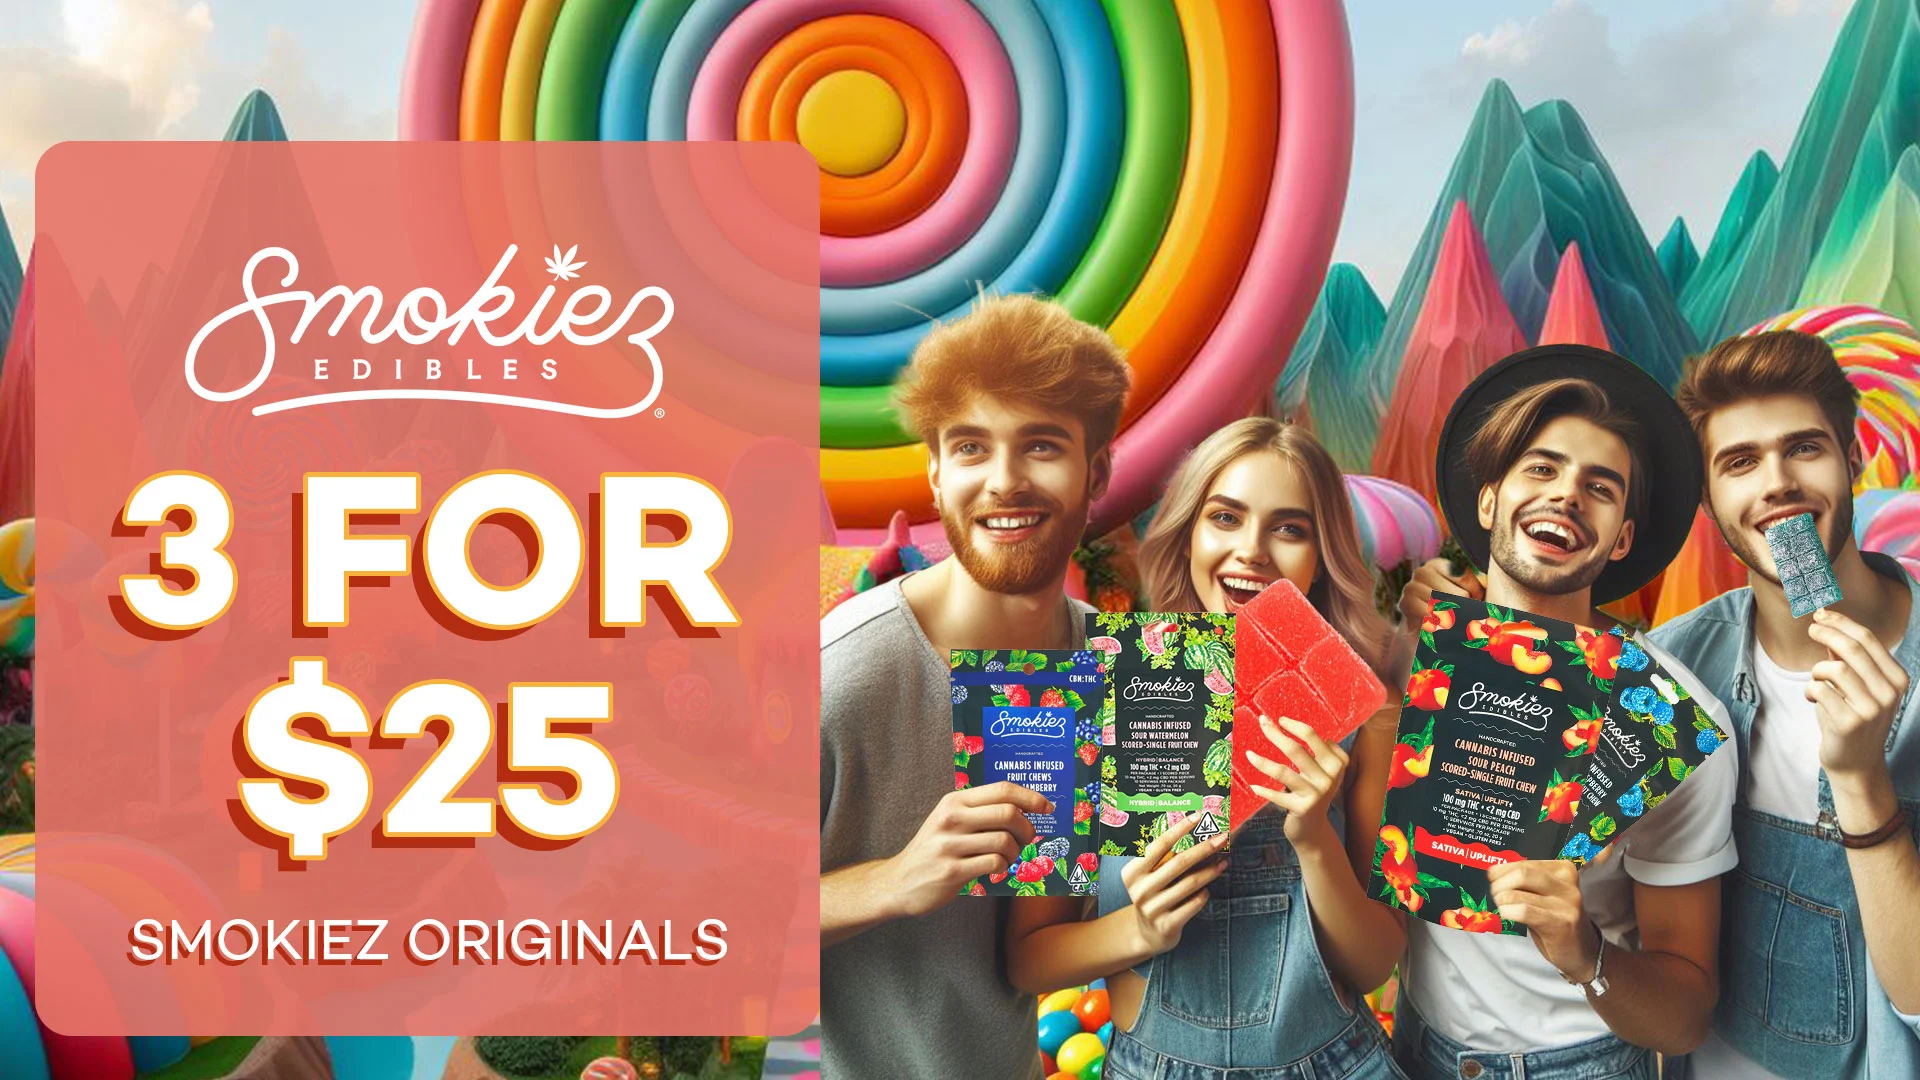 Smokiez Cannabis infused gummies and edibles promotion